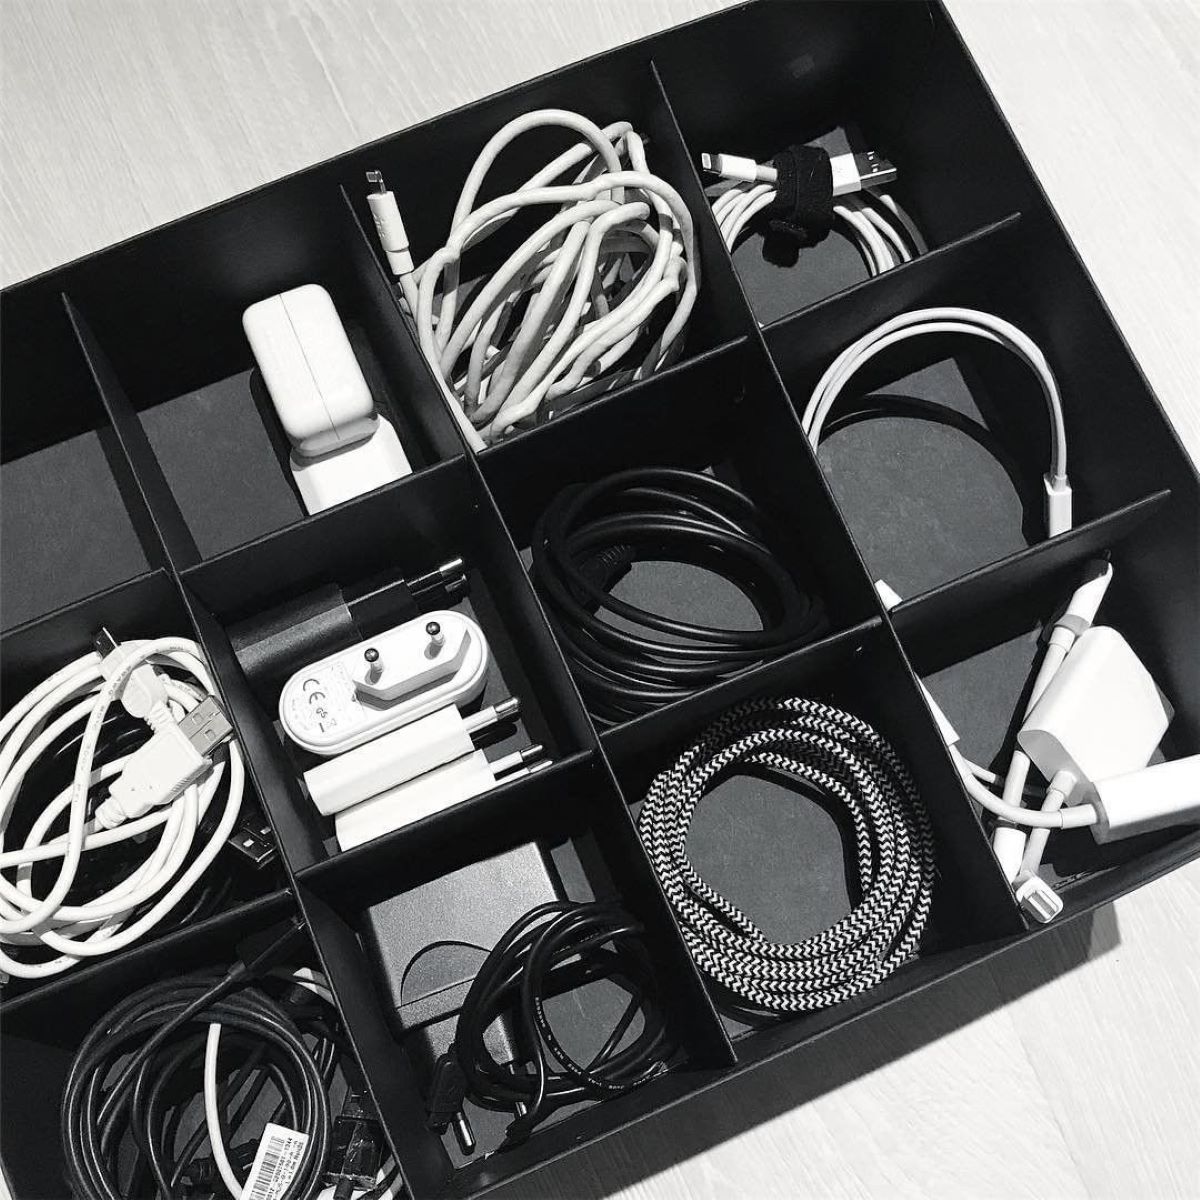 How To Store Cables And Wires